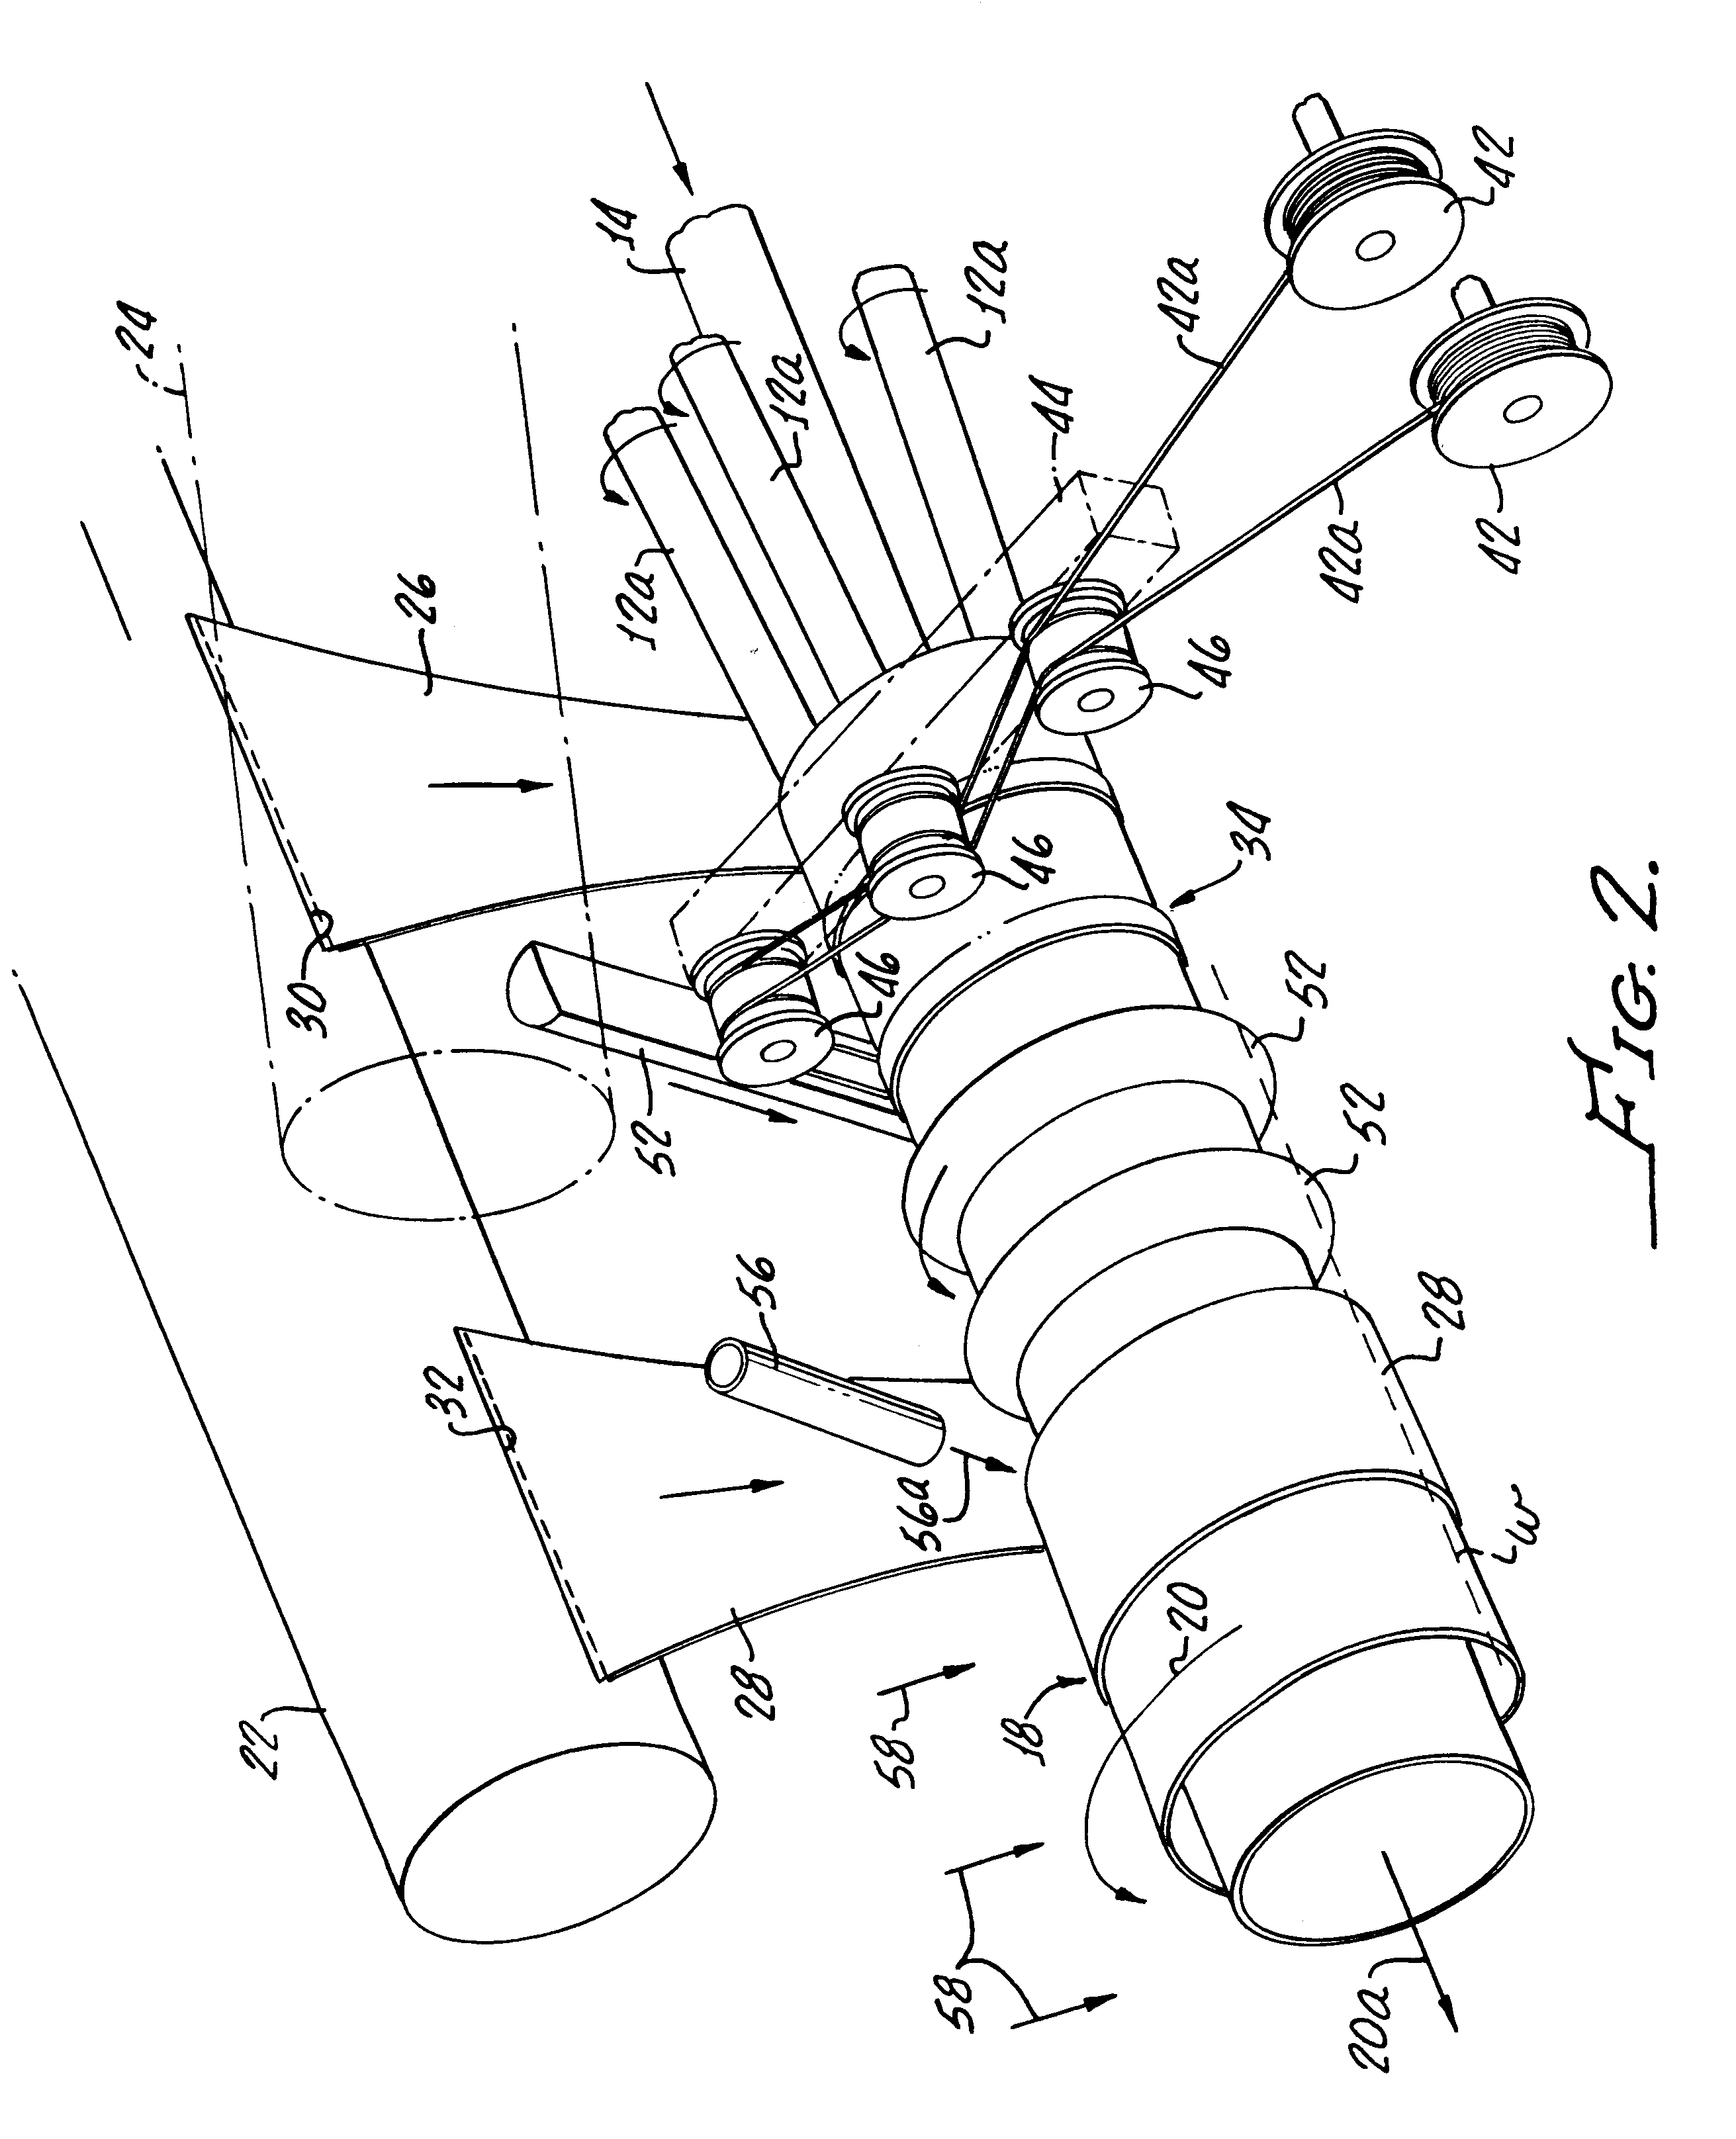 Method of making a double-walled flexible tubing product with helical support bead and heating conductor